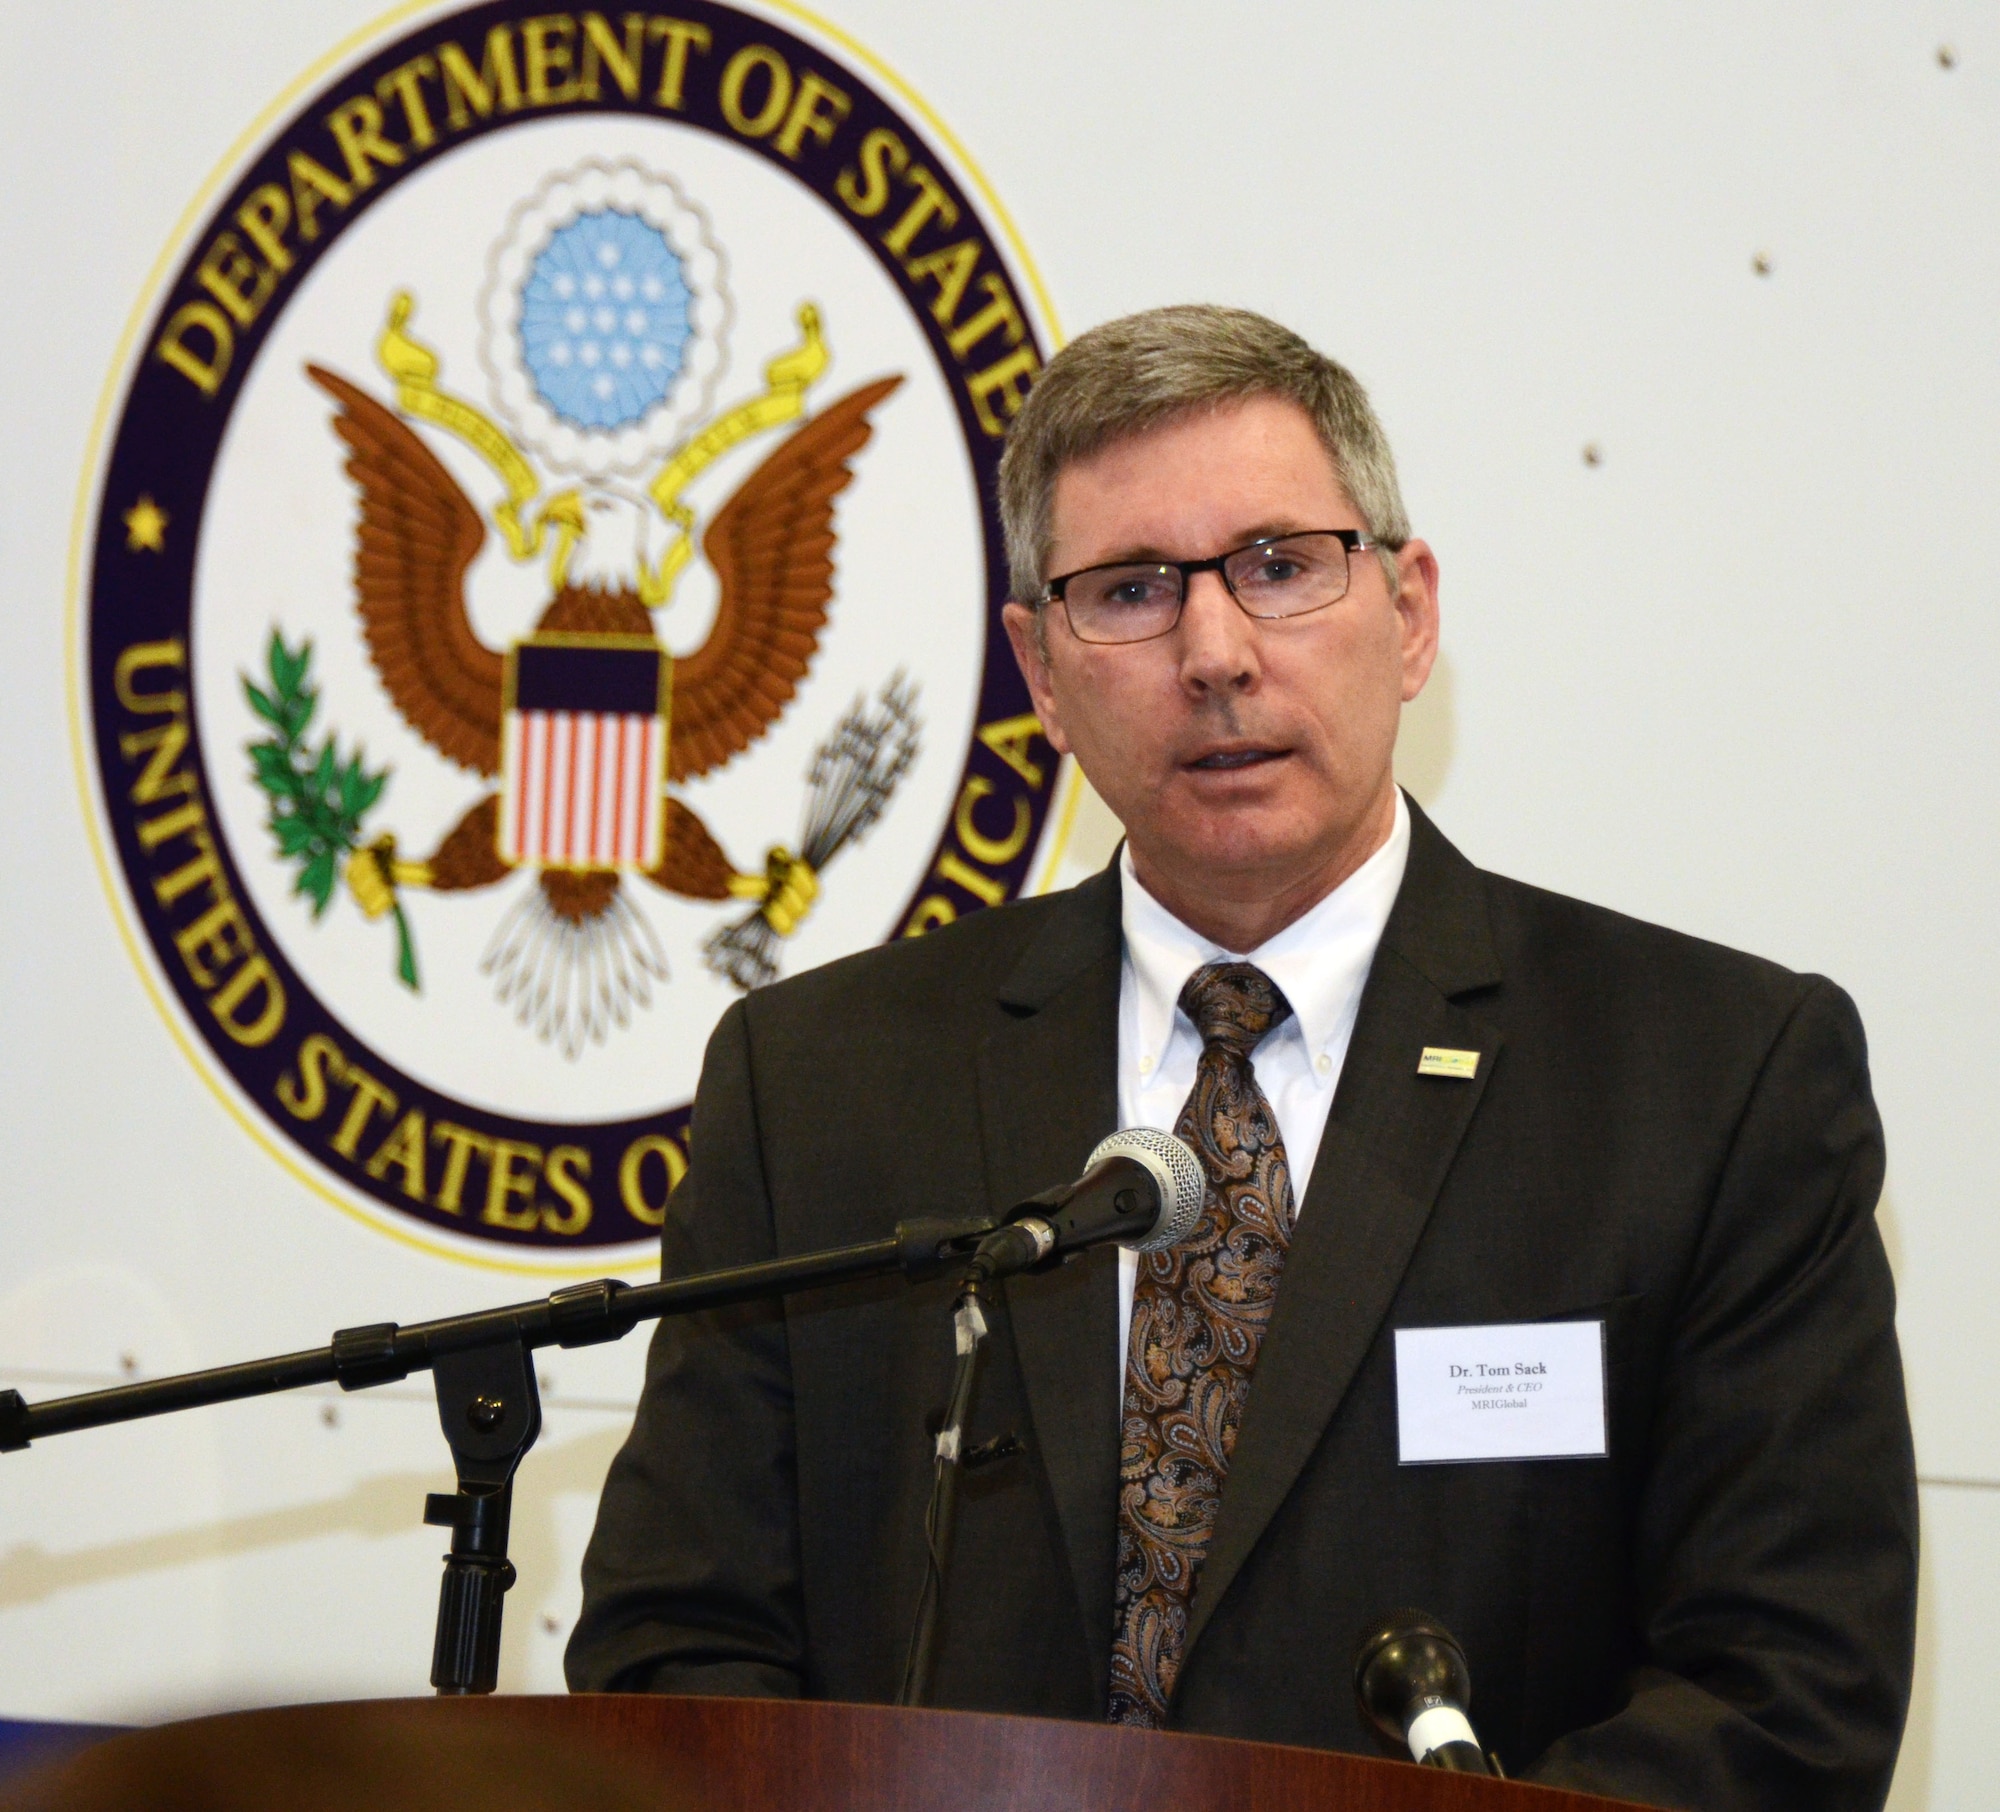 Dr. Tom Sack, President and CEO of MRI Global, addresses an audience of personnel from the Department of State, MRI Global, Paul Allen Foundation and members of the 94th Airlift Wing, at an unveiling of the DOS Containerized Biocontainment System held at Dobbins Air Reserve Base, Ga. Aug. 11, 2015. (U.S. Air Force photo/Don Peek)